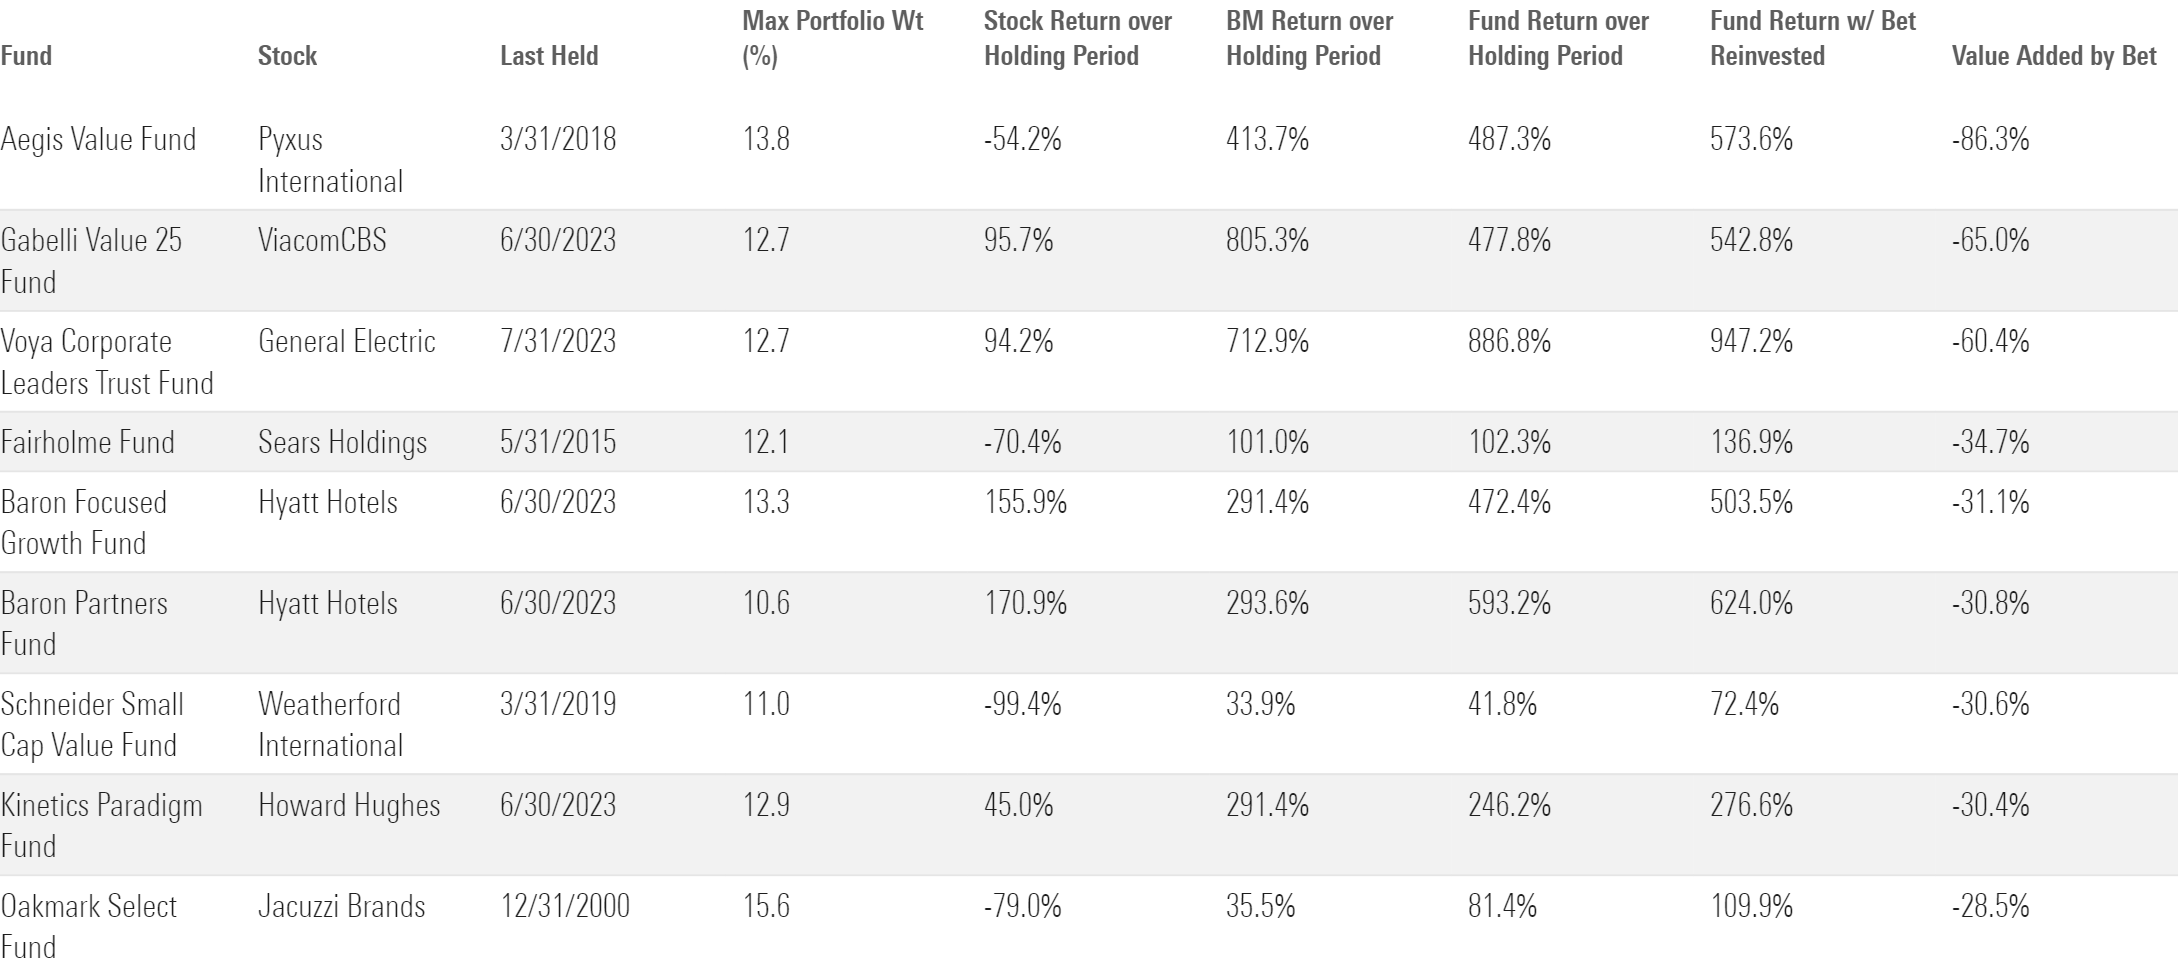 A table of the worst mutual fund bets since 1997 by value added.